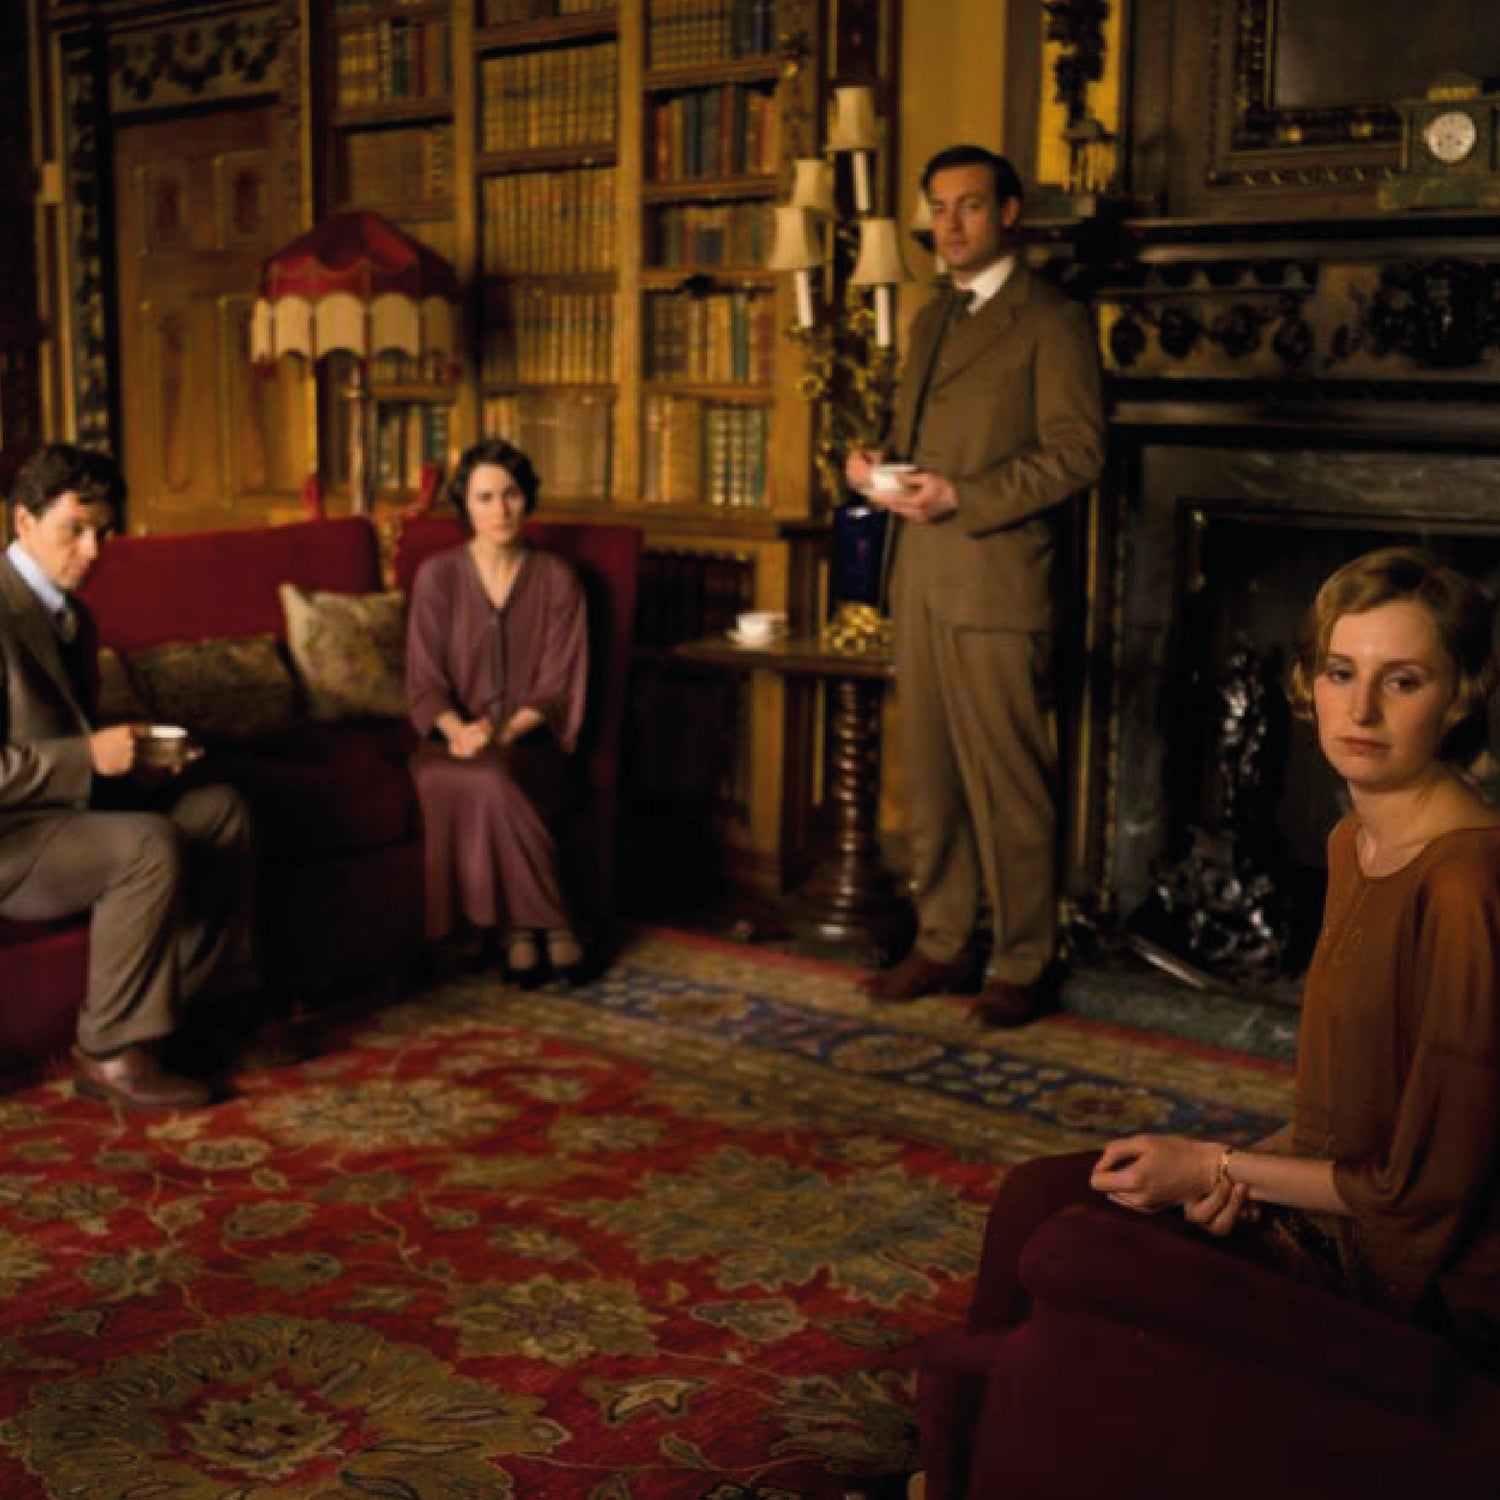 Traditional Furniture & Decor Downton Abbey Style